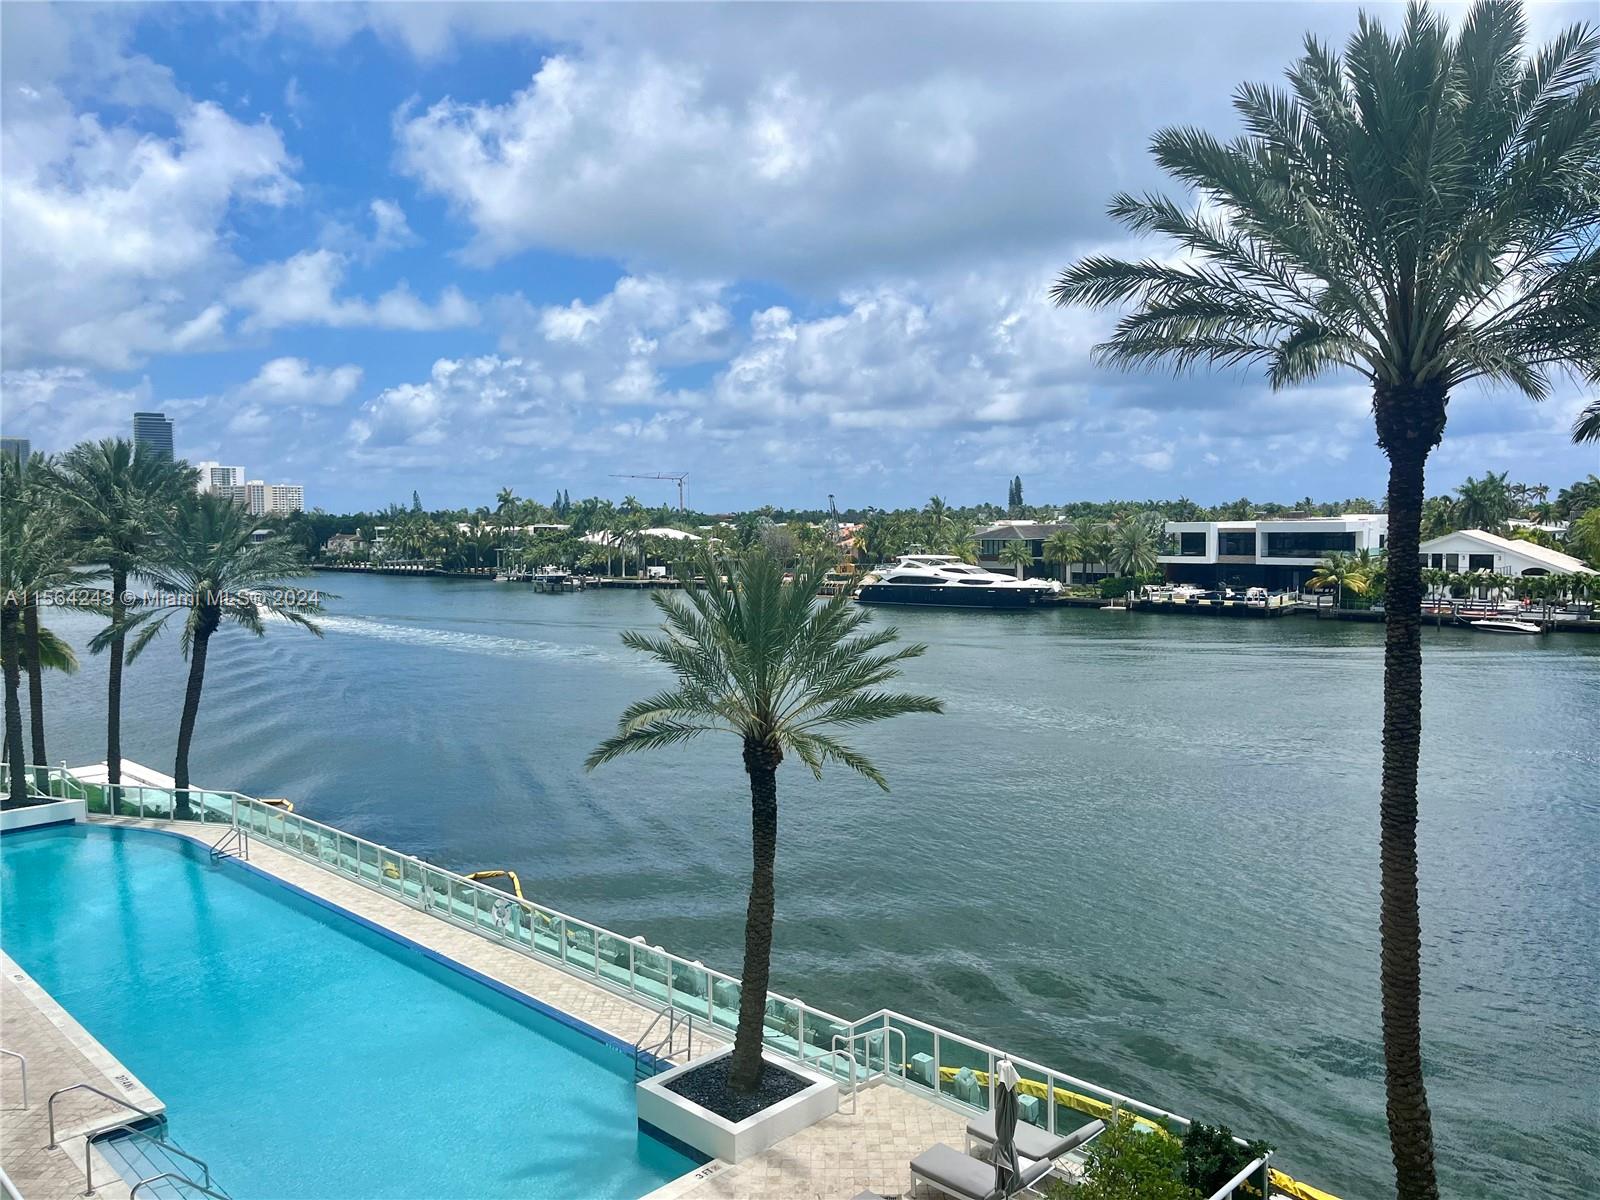 Beautiful upgraded vey spacious 3 bed + Den + laundry rooms, 3.5bath flow thru East to West, Intracoastal view
on one side, golf on the other. Amenities:2 Pools, 2 Gym, Spa-Tennis-Racquet-Basketball-Movie theater,
Restaurant, Café, Valet 24h. Close to Aventura Mall, golf course, house of worship.
Minimum rent 6 months